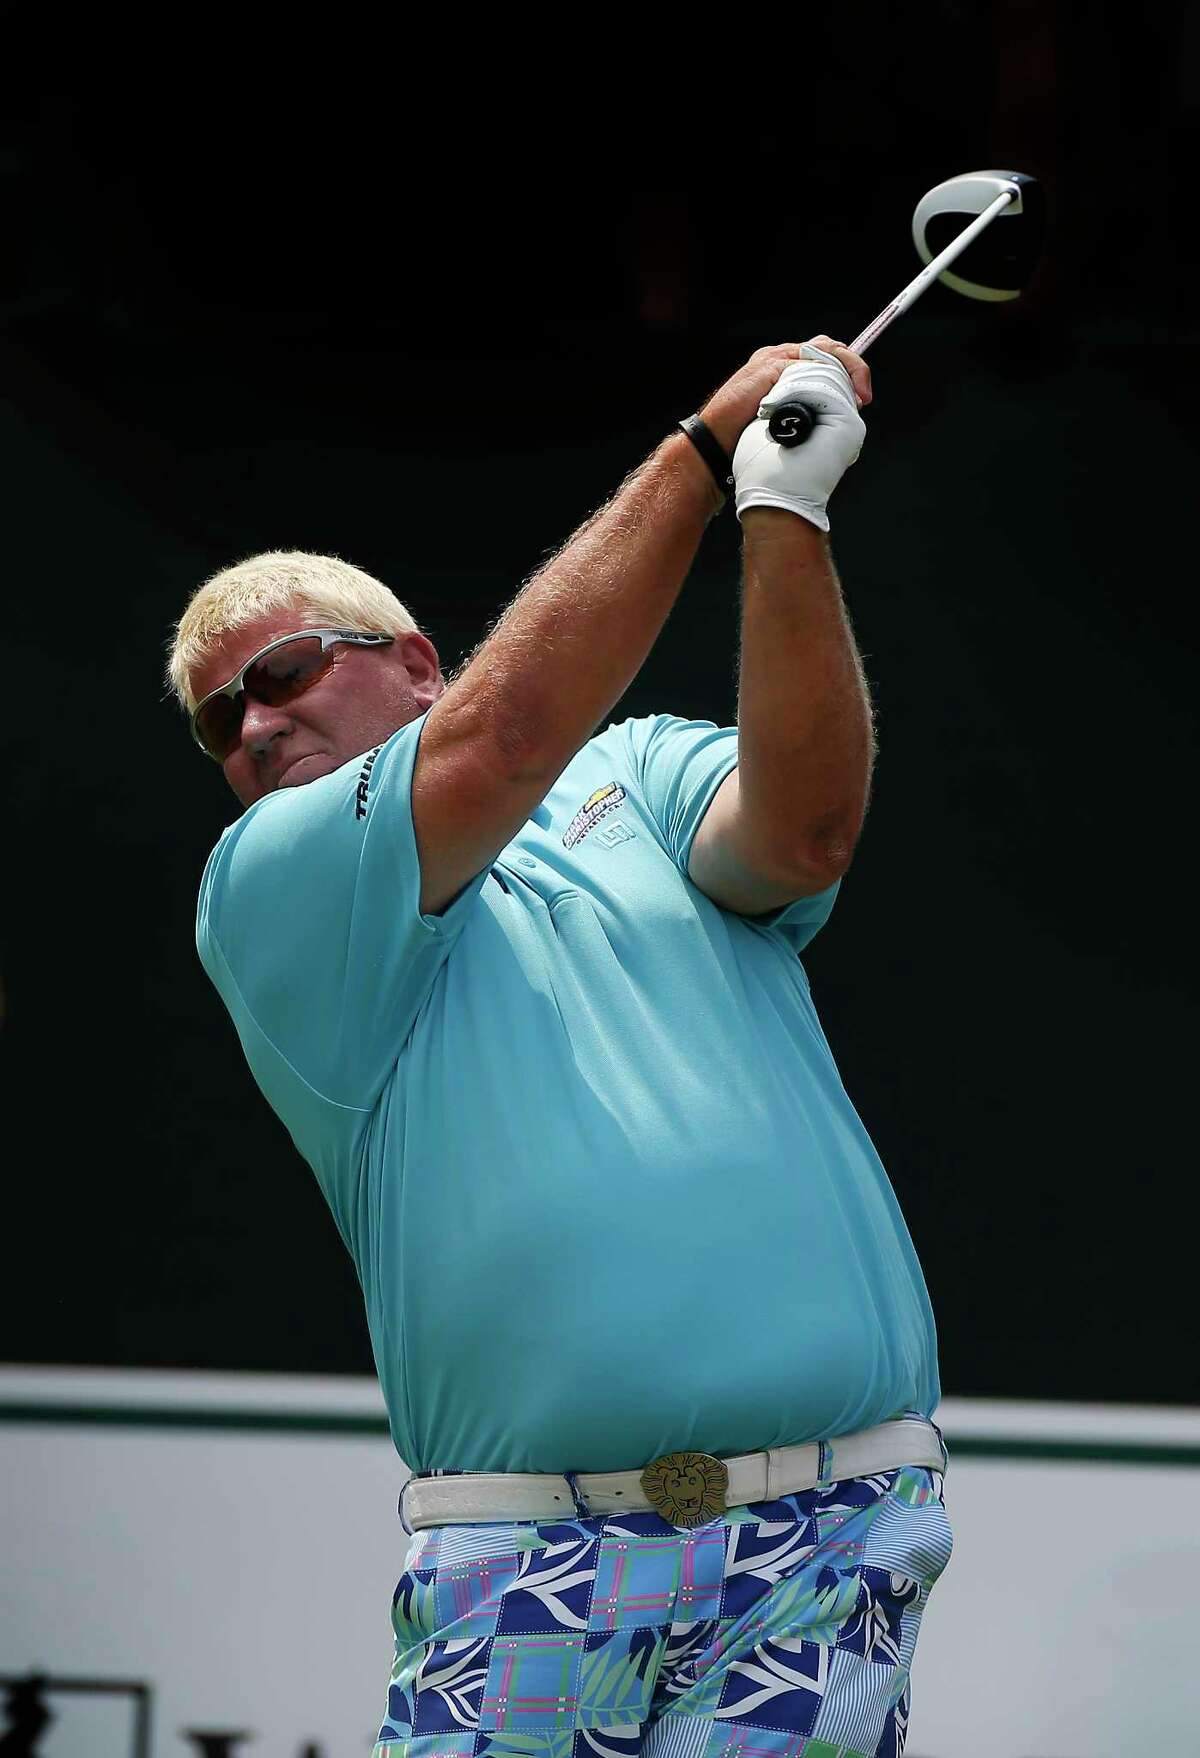 John Daly tees off the 10th during the Woodforest National Bank Championship Pro-AM Thursday, May 3, 2018, in The Woodlands.